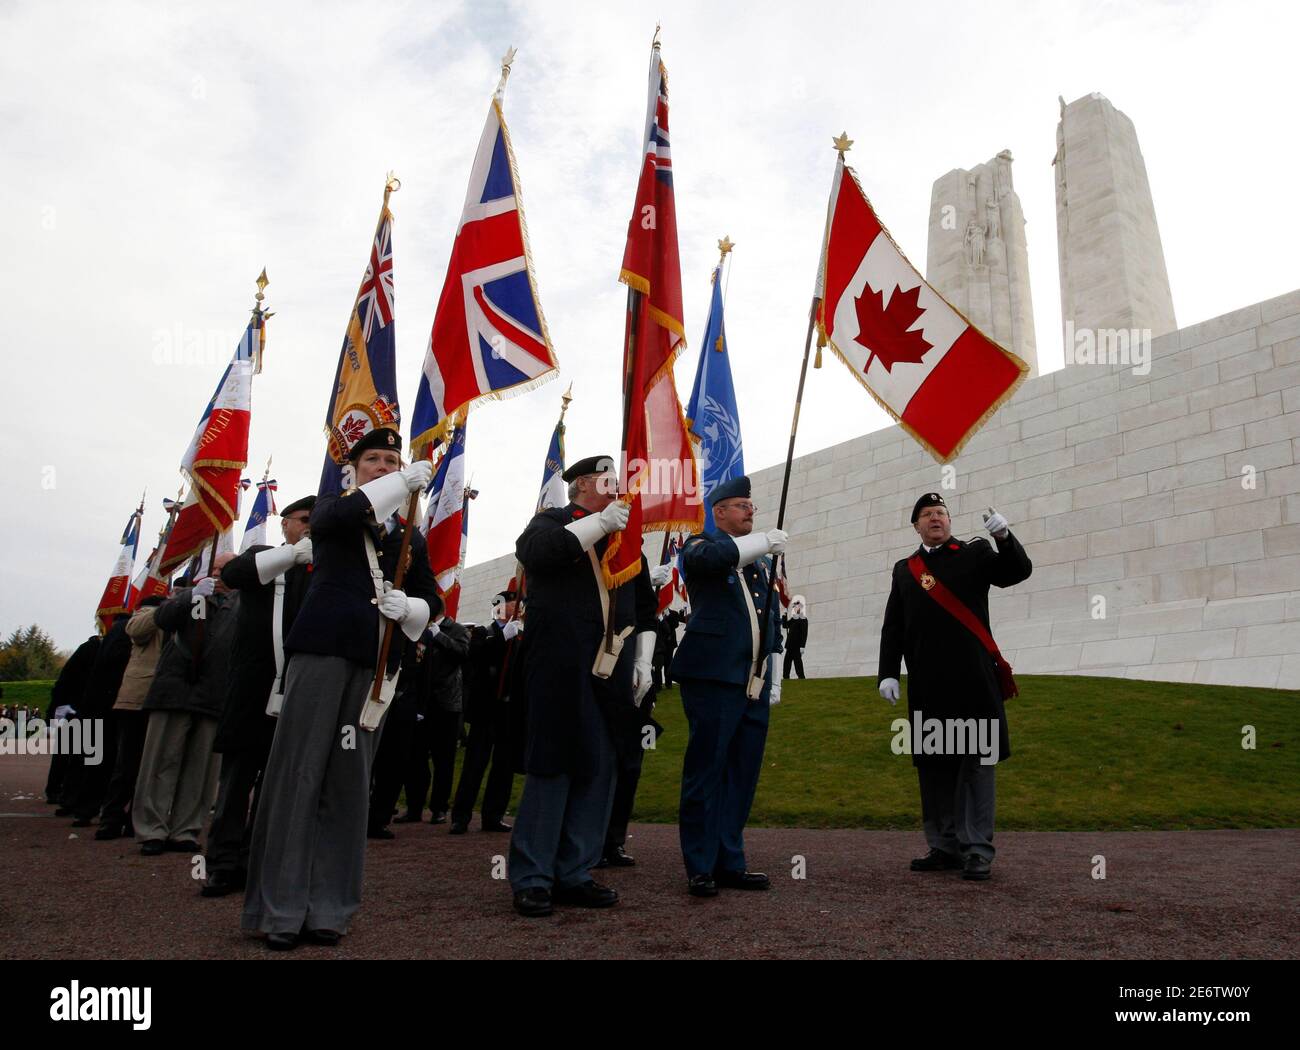 A colour party prepares to march away from the Canadian National Vimy Memorial following a Remembrance Day ceremony to commemorate members of the armed forces who were killed since World War One in Vimy November 9, 2008.       REUTERS/Chris Wattie       (FRANCE) Stock Photo